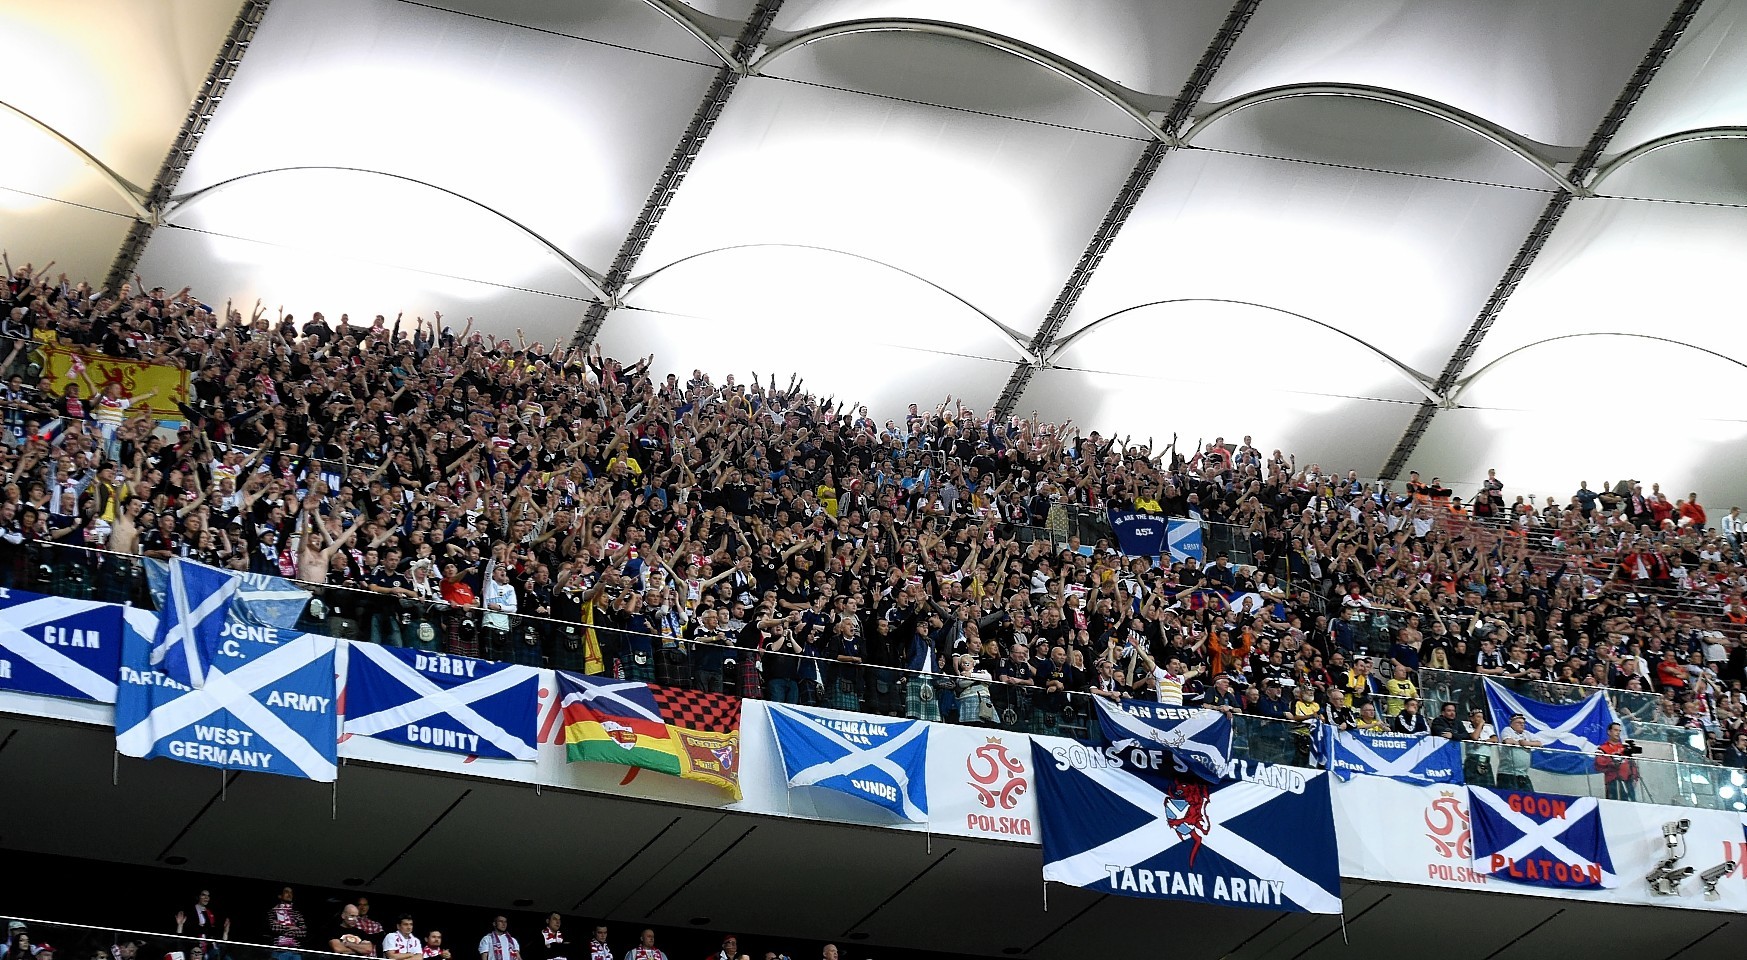 The Tartan Army were in fine voice throughout the match